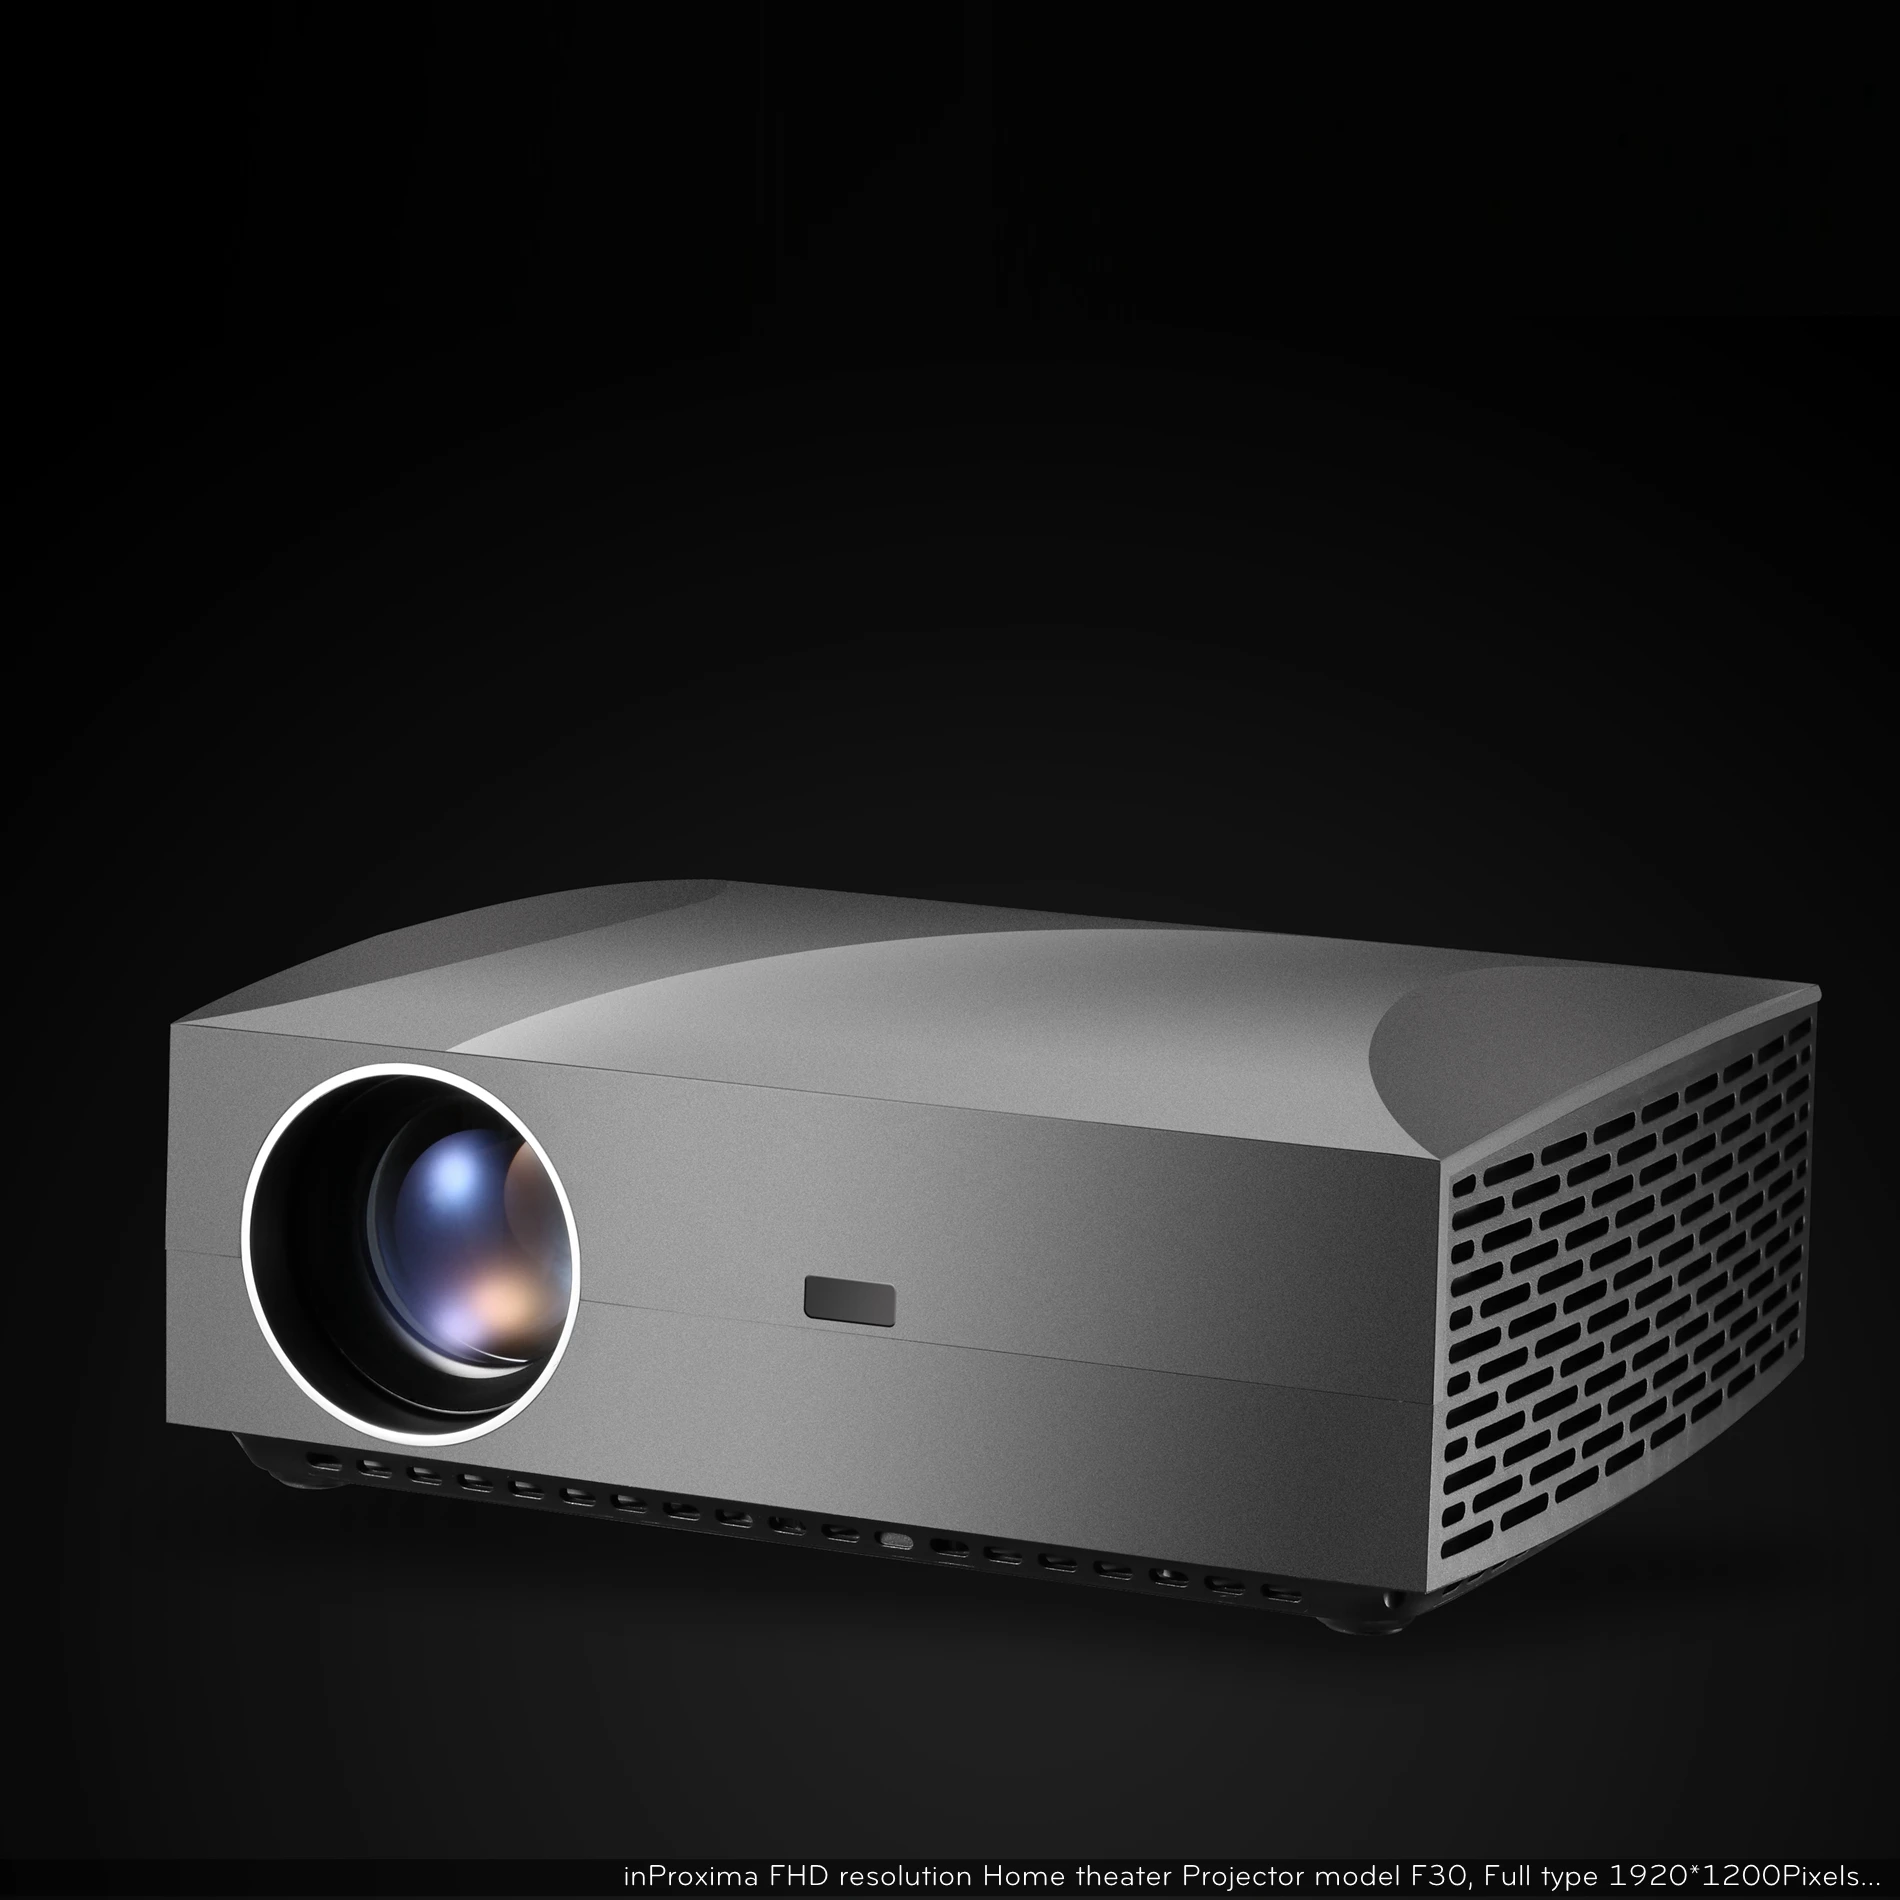 

inProxima F30 FHD native 1920x1080 resolution LED LCD smart projector better than ultra short throw projector, N/a